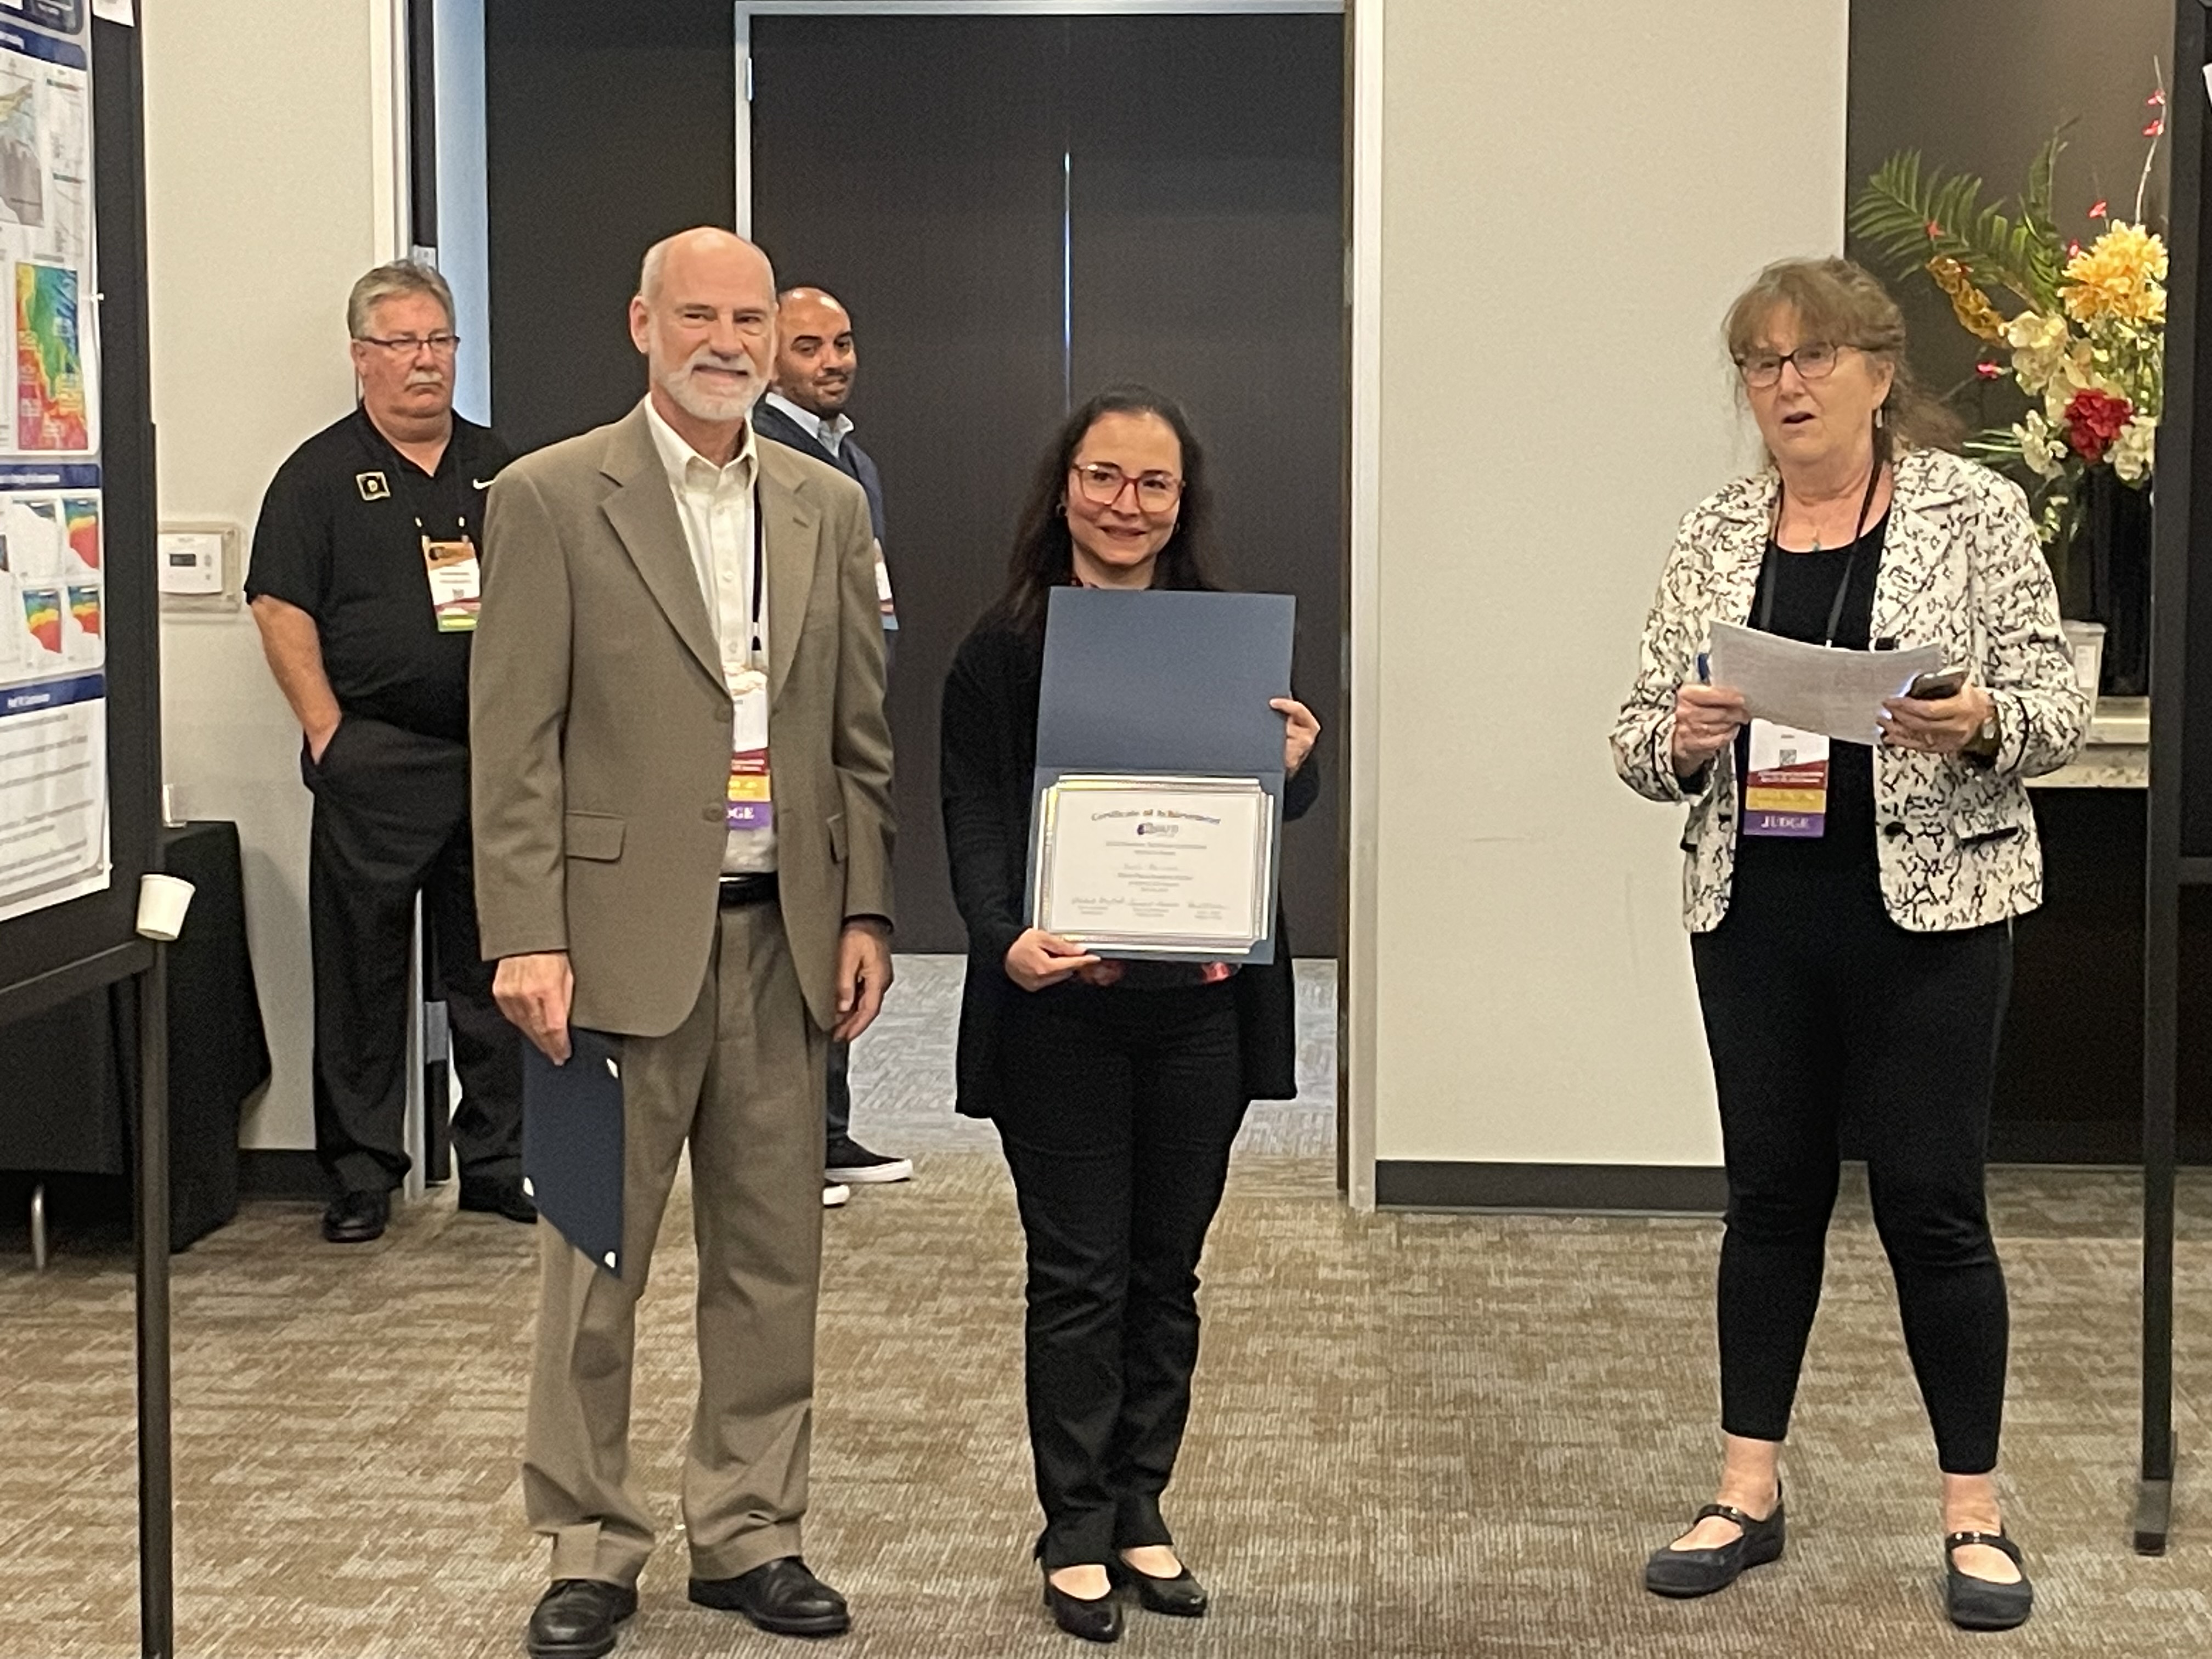 Ruth Beltran wins 3rd Place in the Student Poster Competition at GeoGulf23